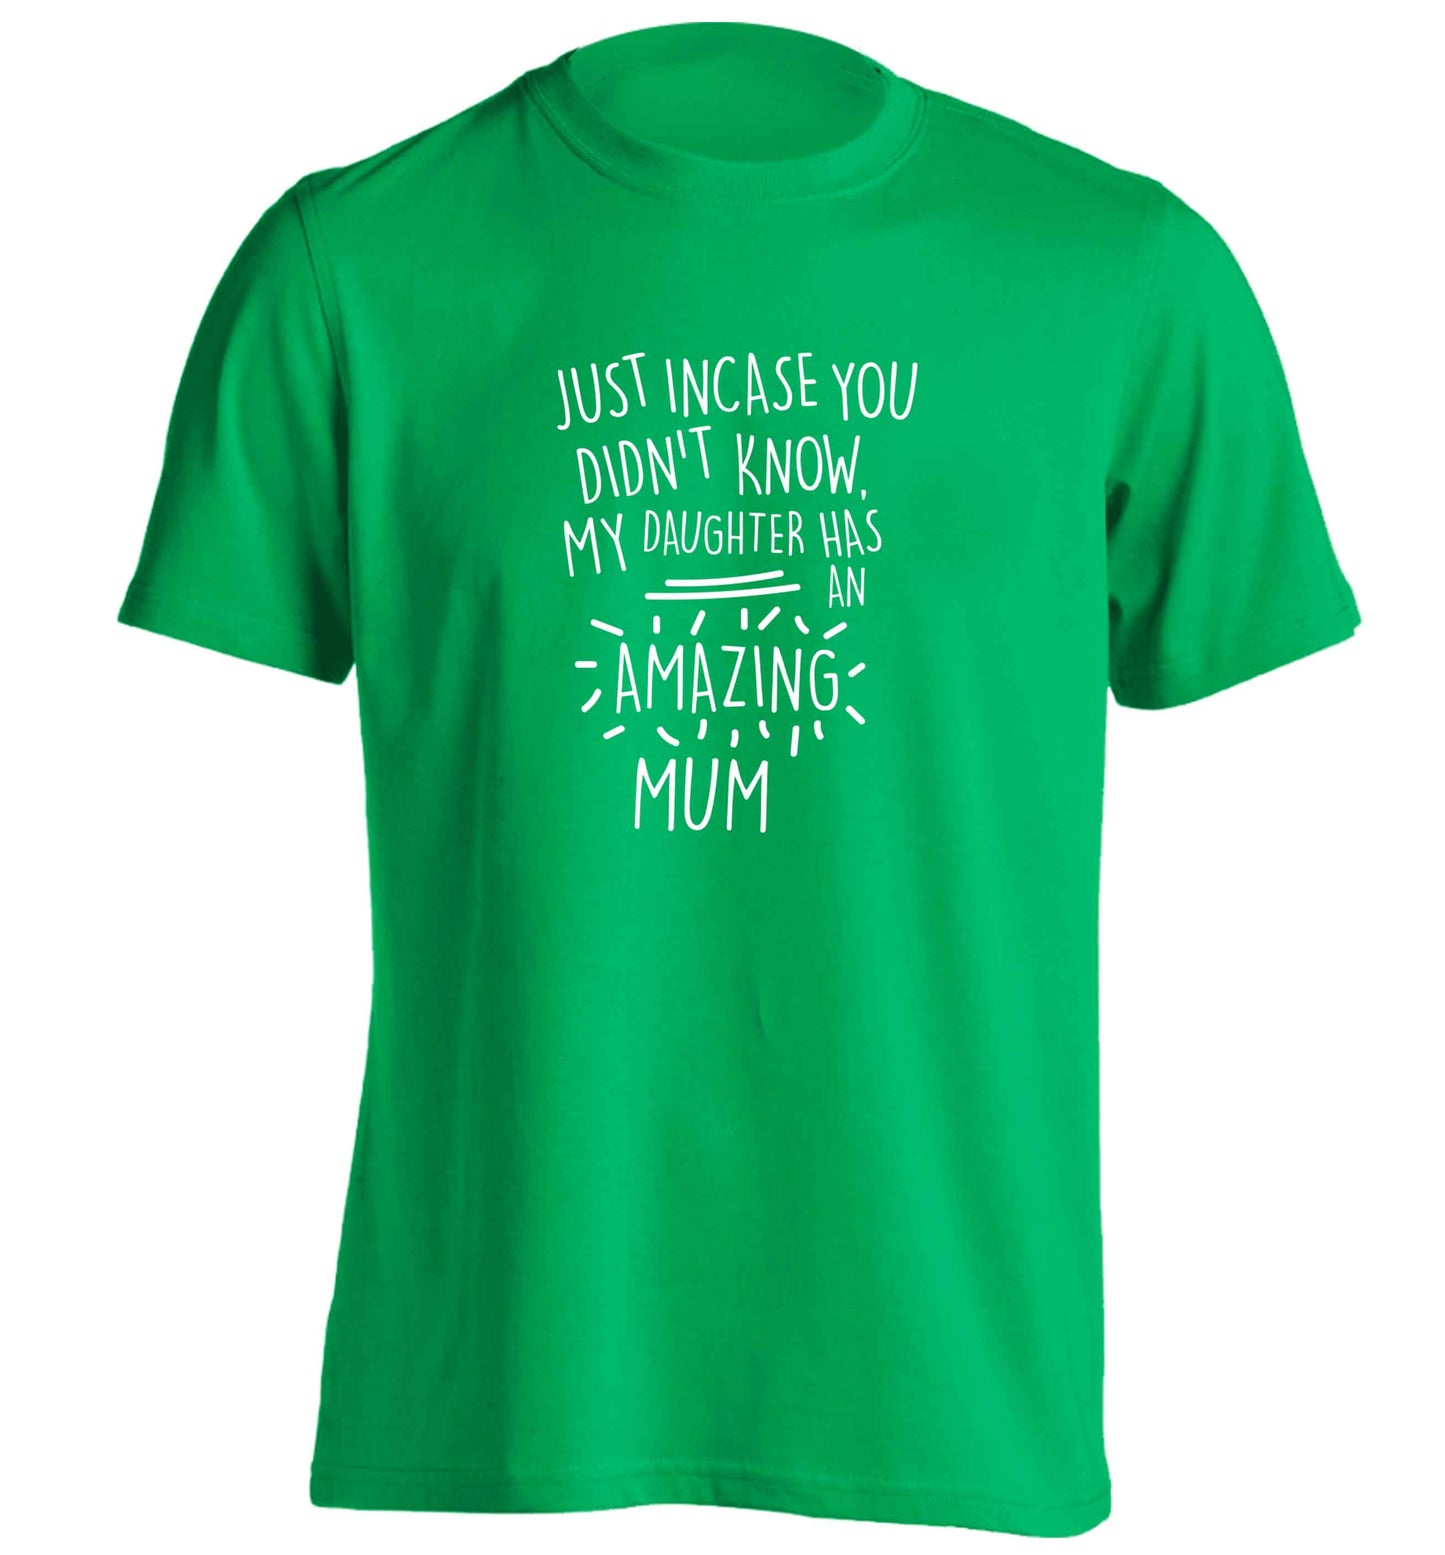 Just incase you didn't know my daughter has an amazing mum adults unisex green Tshirt 2XL